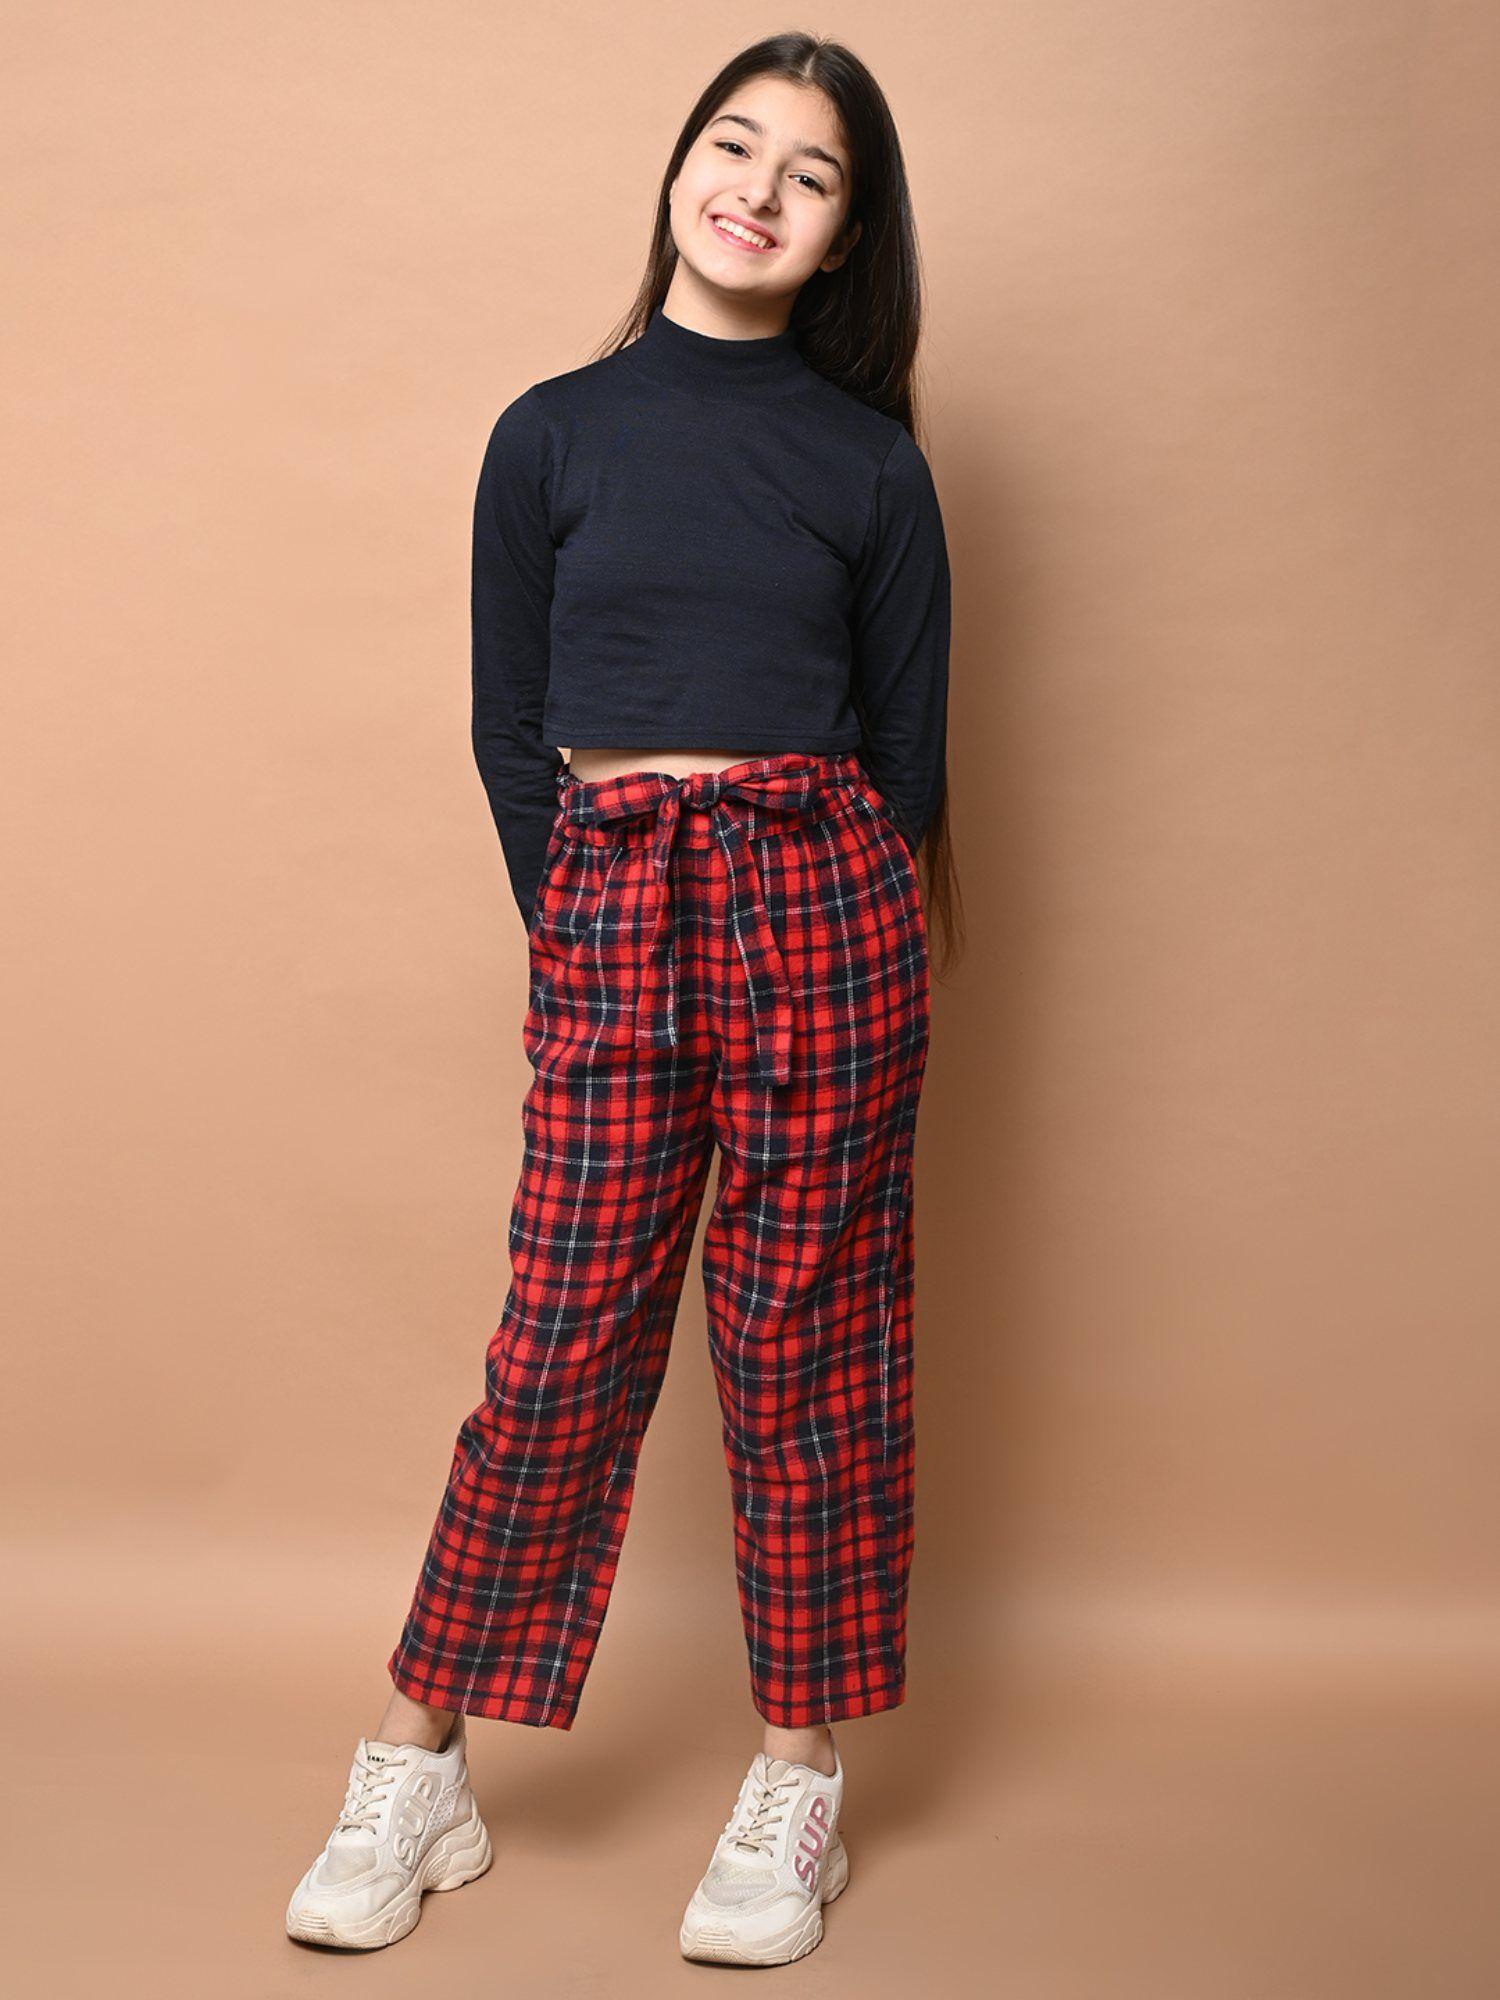 full sleeve high neck top with checkered pants